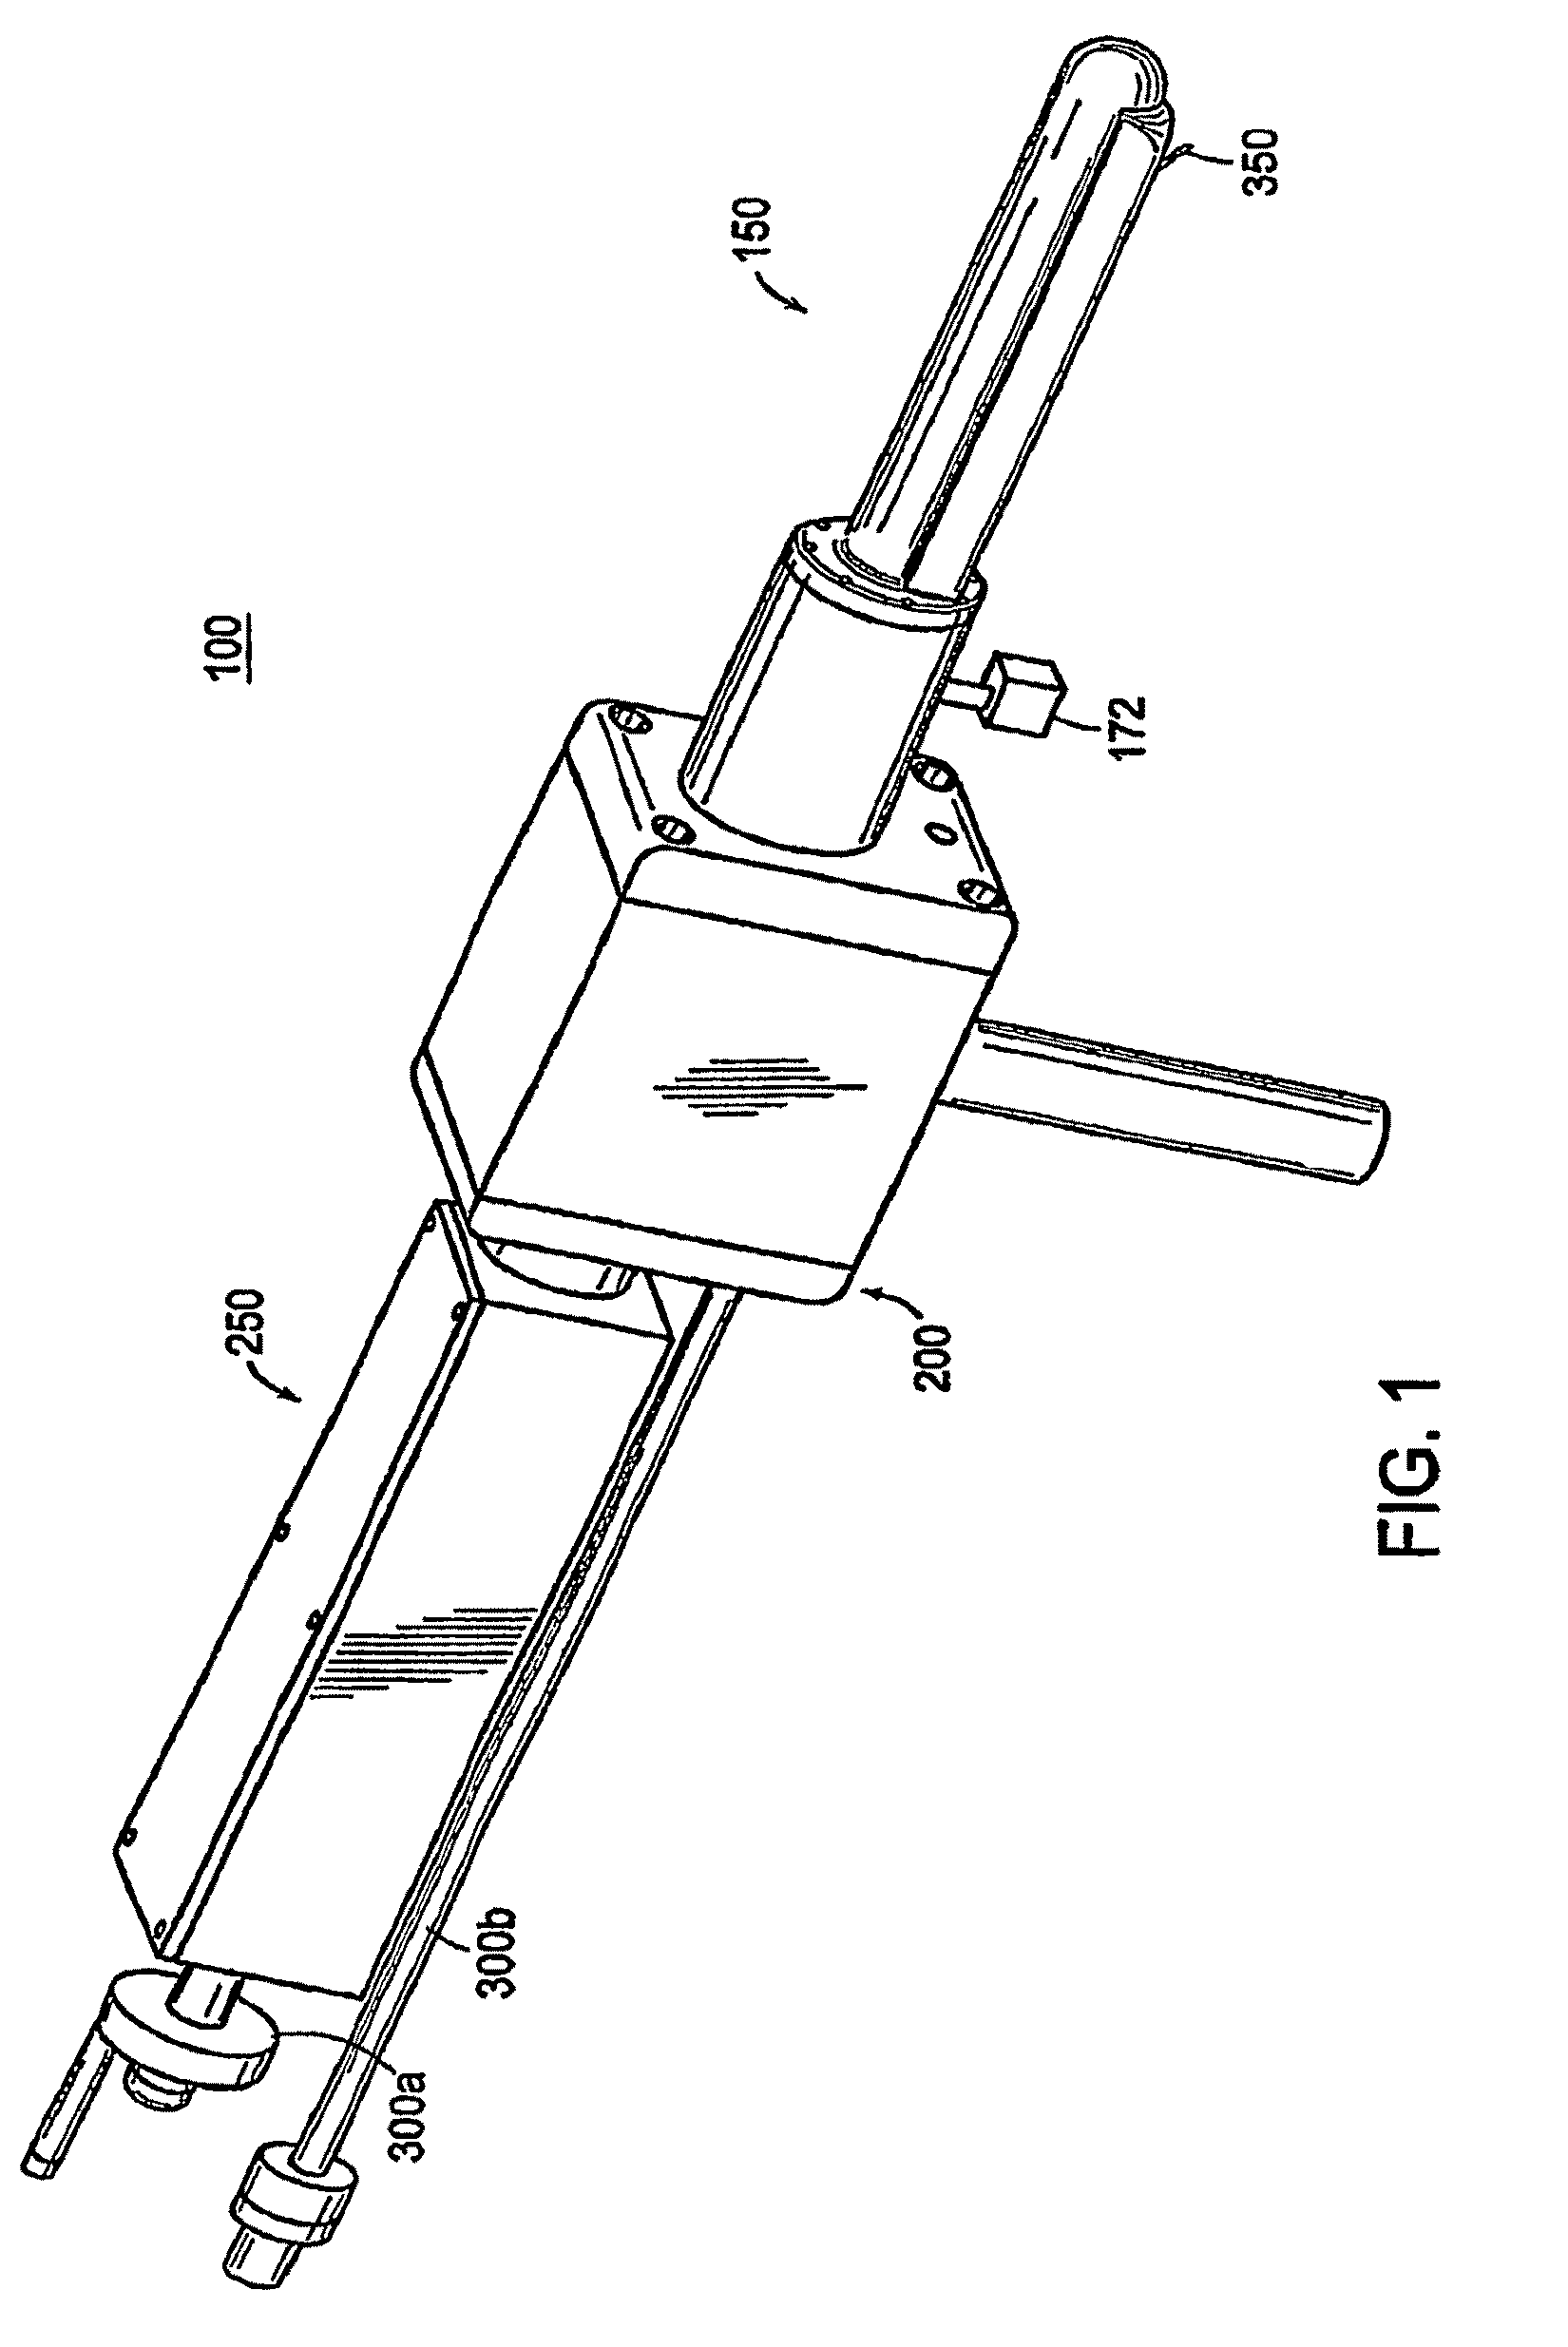 Apparatus for insertion of a medical device within a body during a medical imaging process